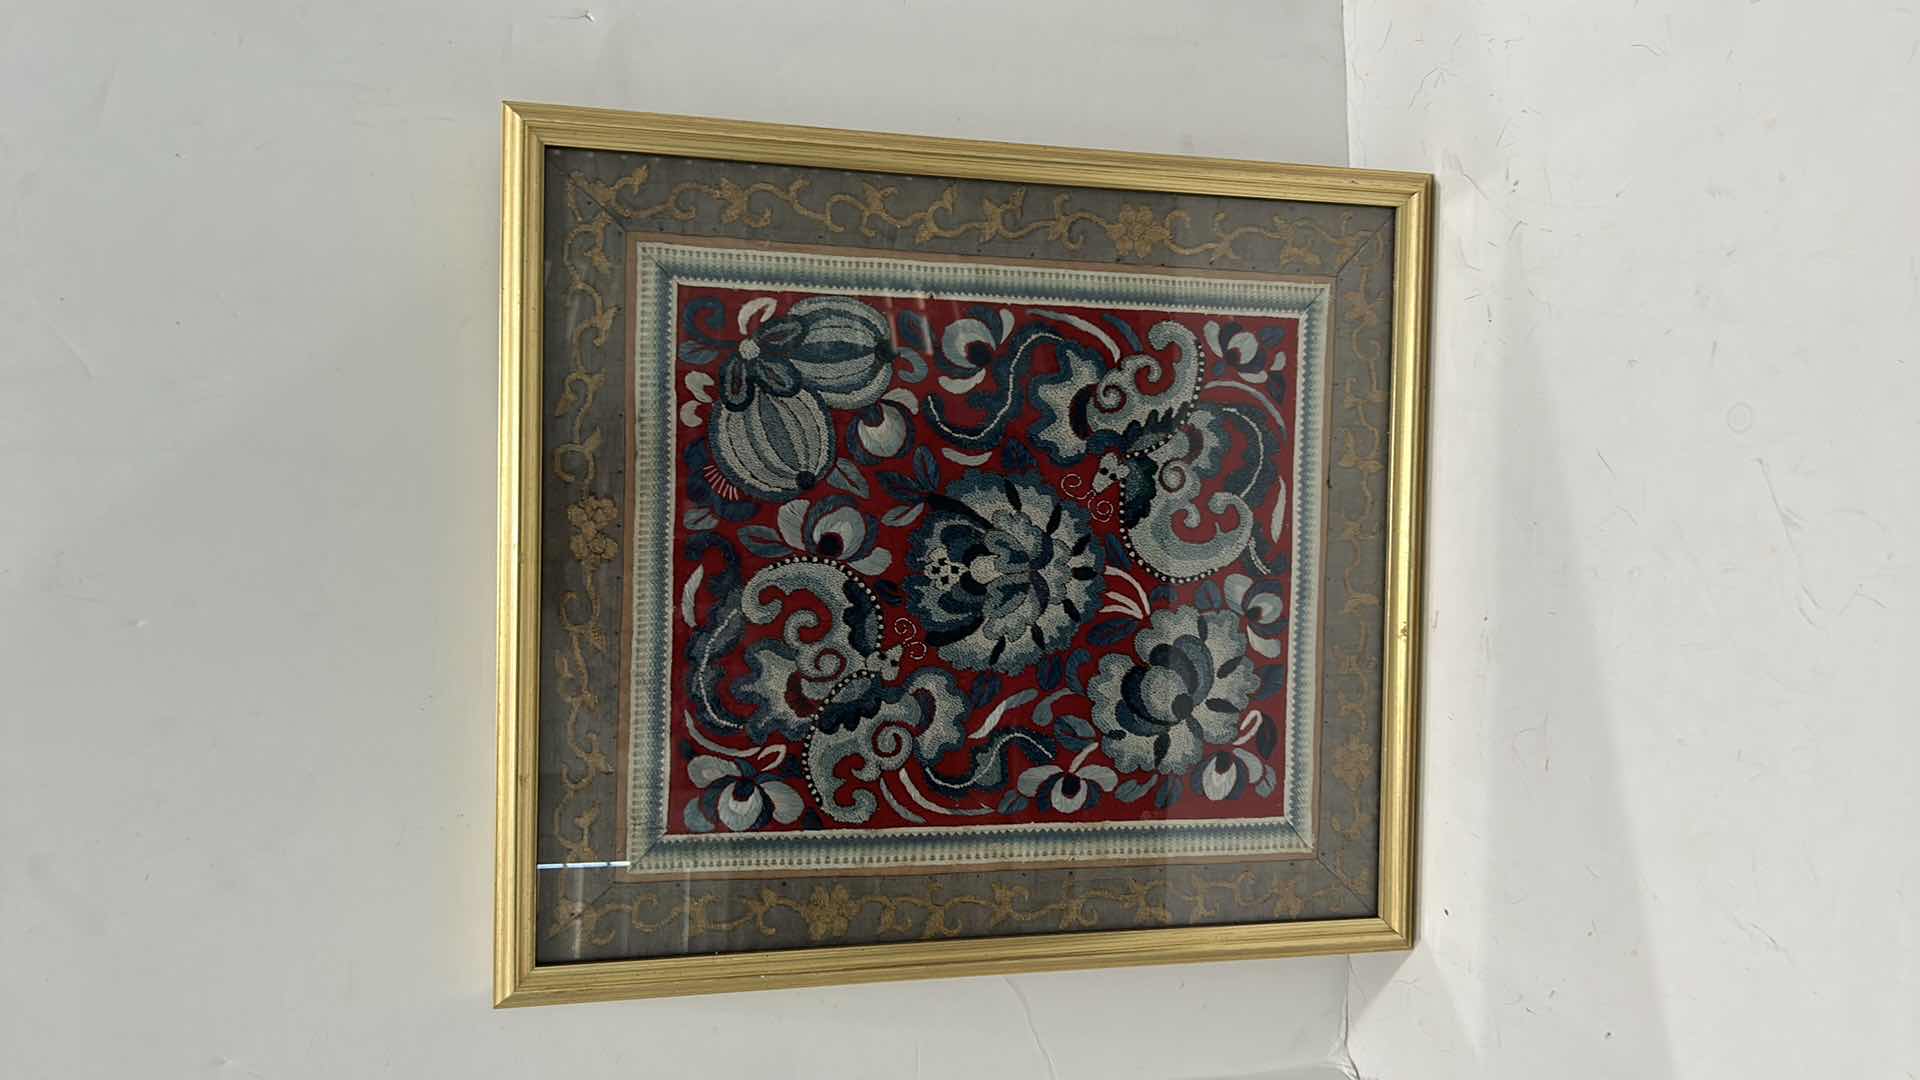 Photo 5 of 1ANTIQUE CHINESE TEXTILE FABRIC, SILK WITH SILK THREAD HAND EMBROIDERY ARTWORK FRAMED 14 1/2” x 17”4 1/2” x 17”